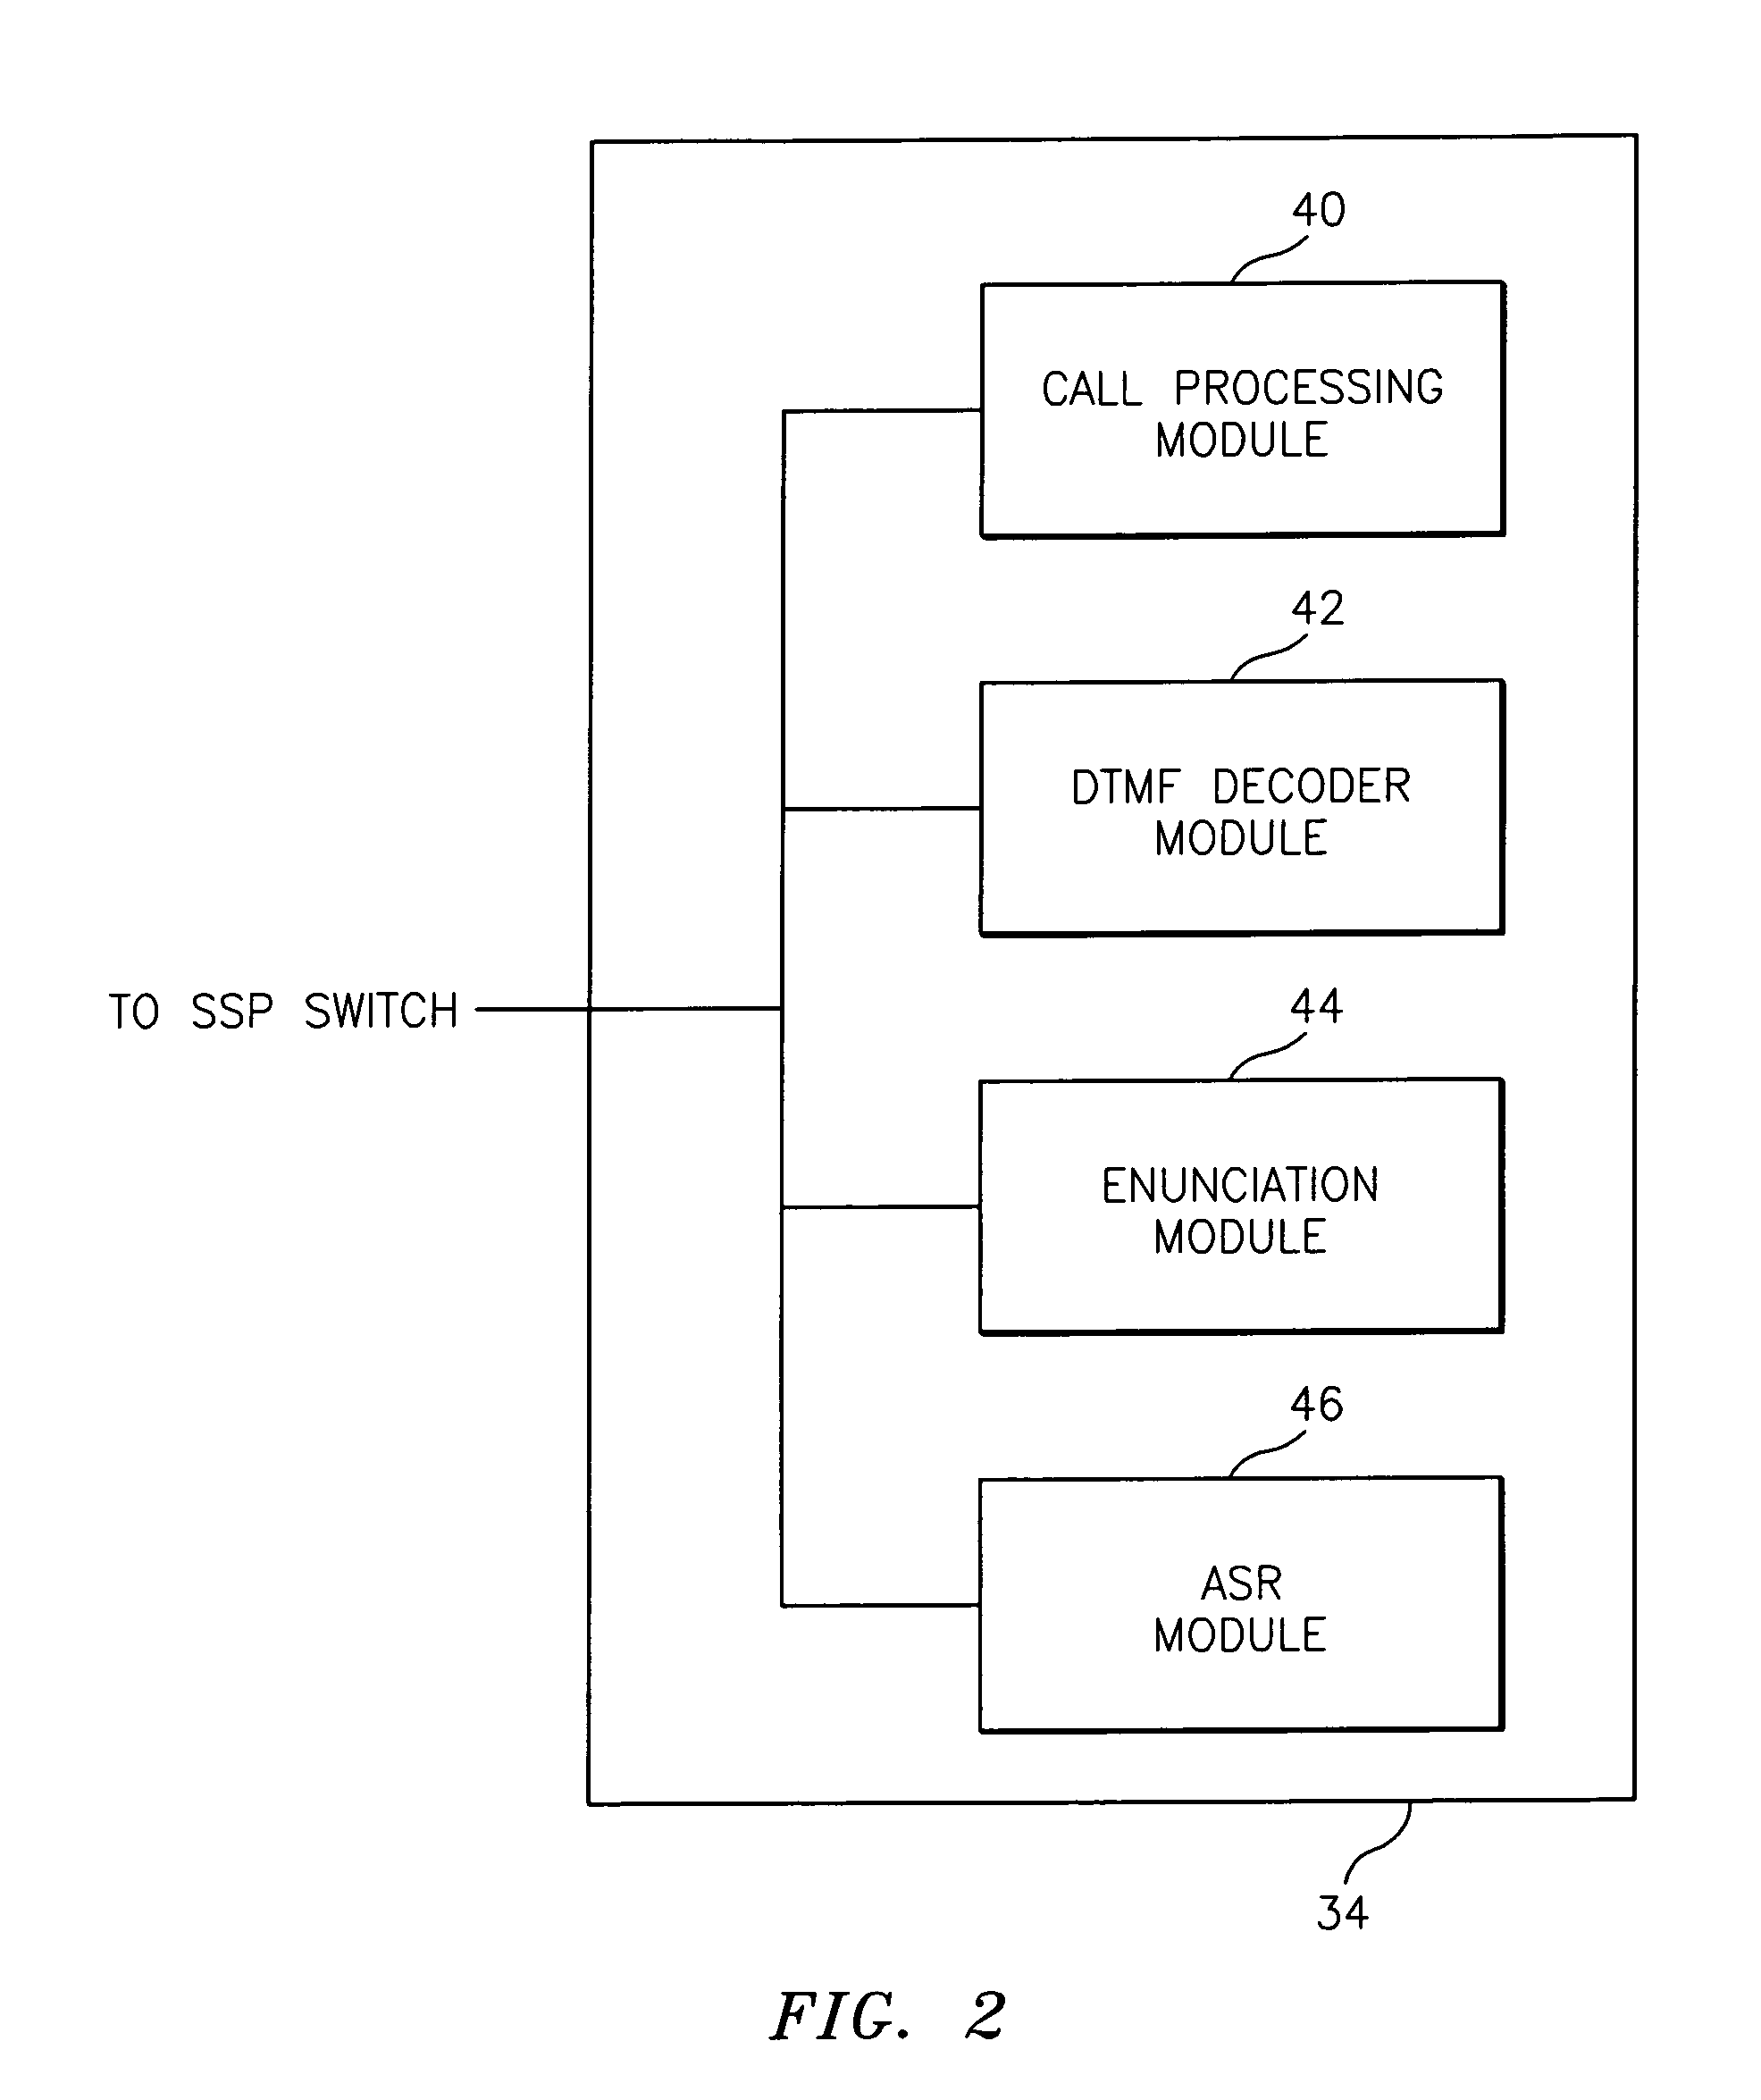 Network and method for providing a flexible call forwarding telecommunications service with automatic speech recognition capability